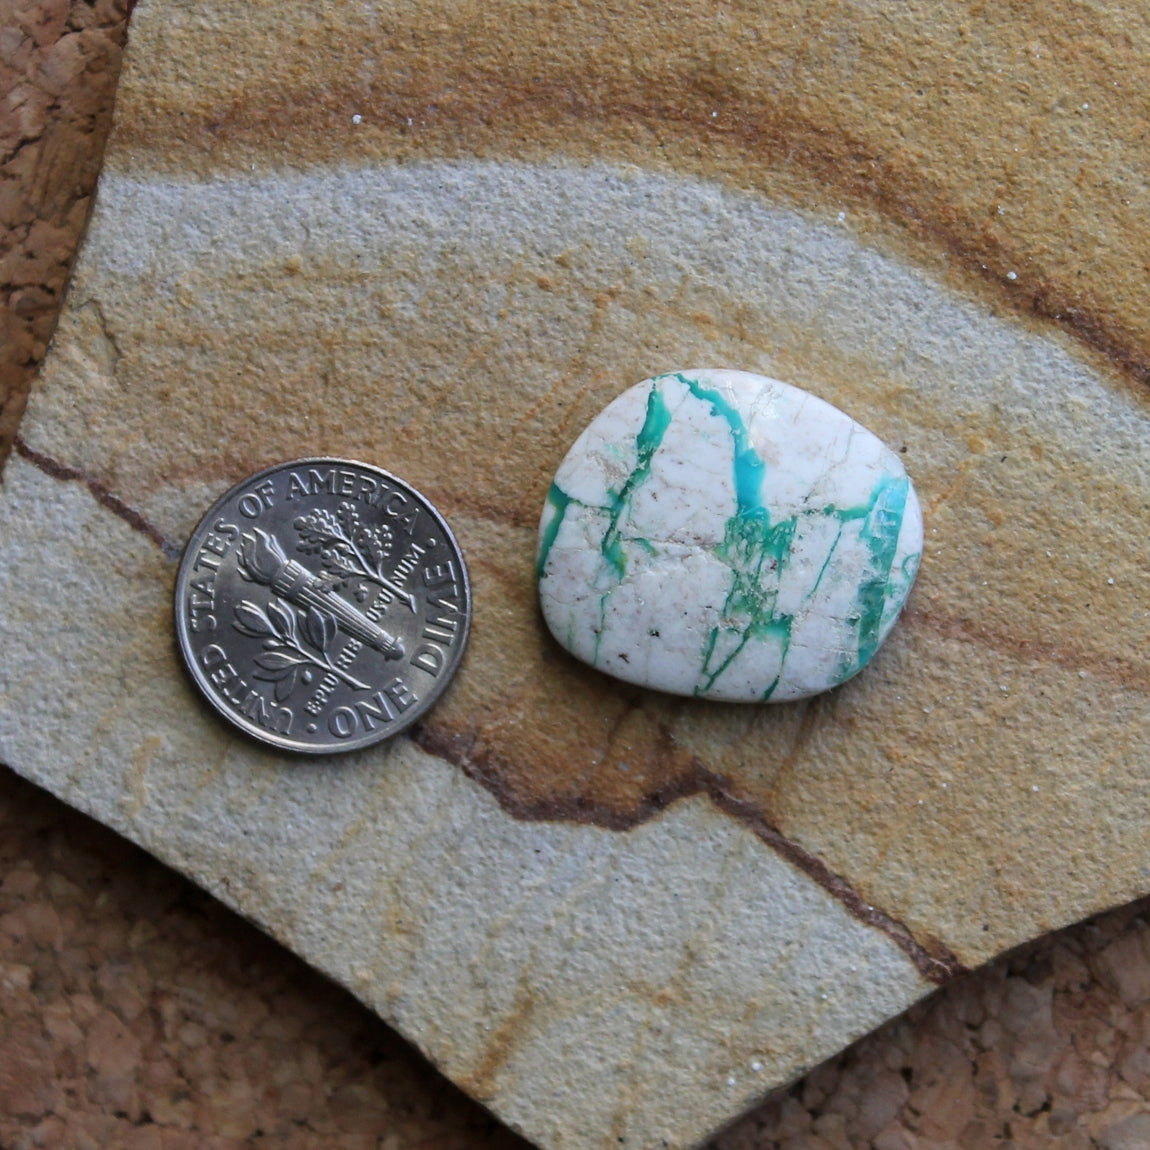 18 carat icy blue boulder-cut Stone Mountain Turquoise cabochon